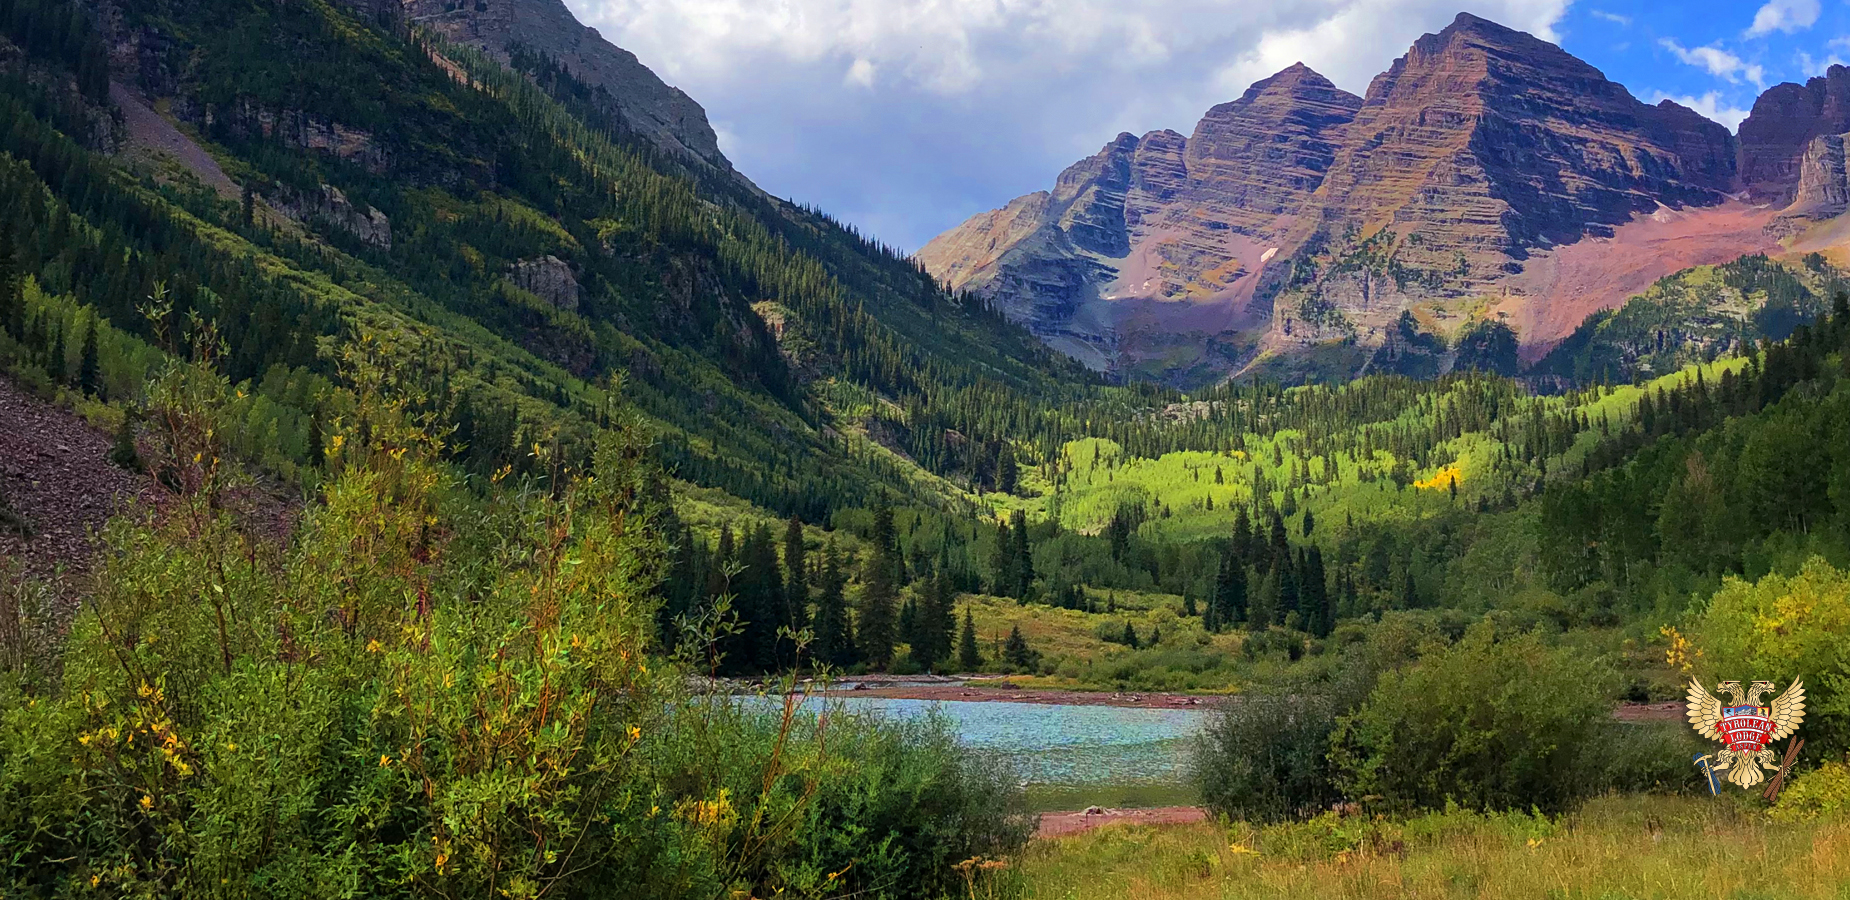 Green turns to yellow early fall at the Maroon Bells